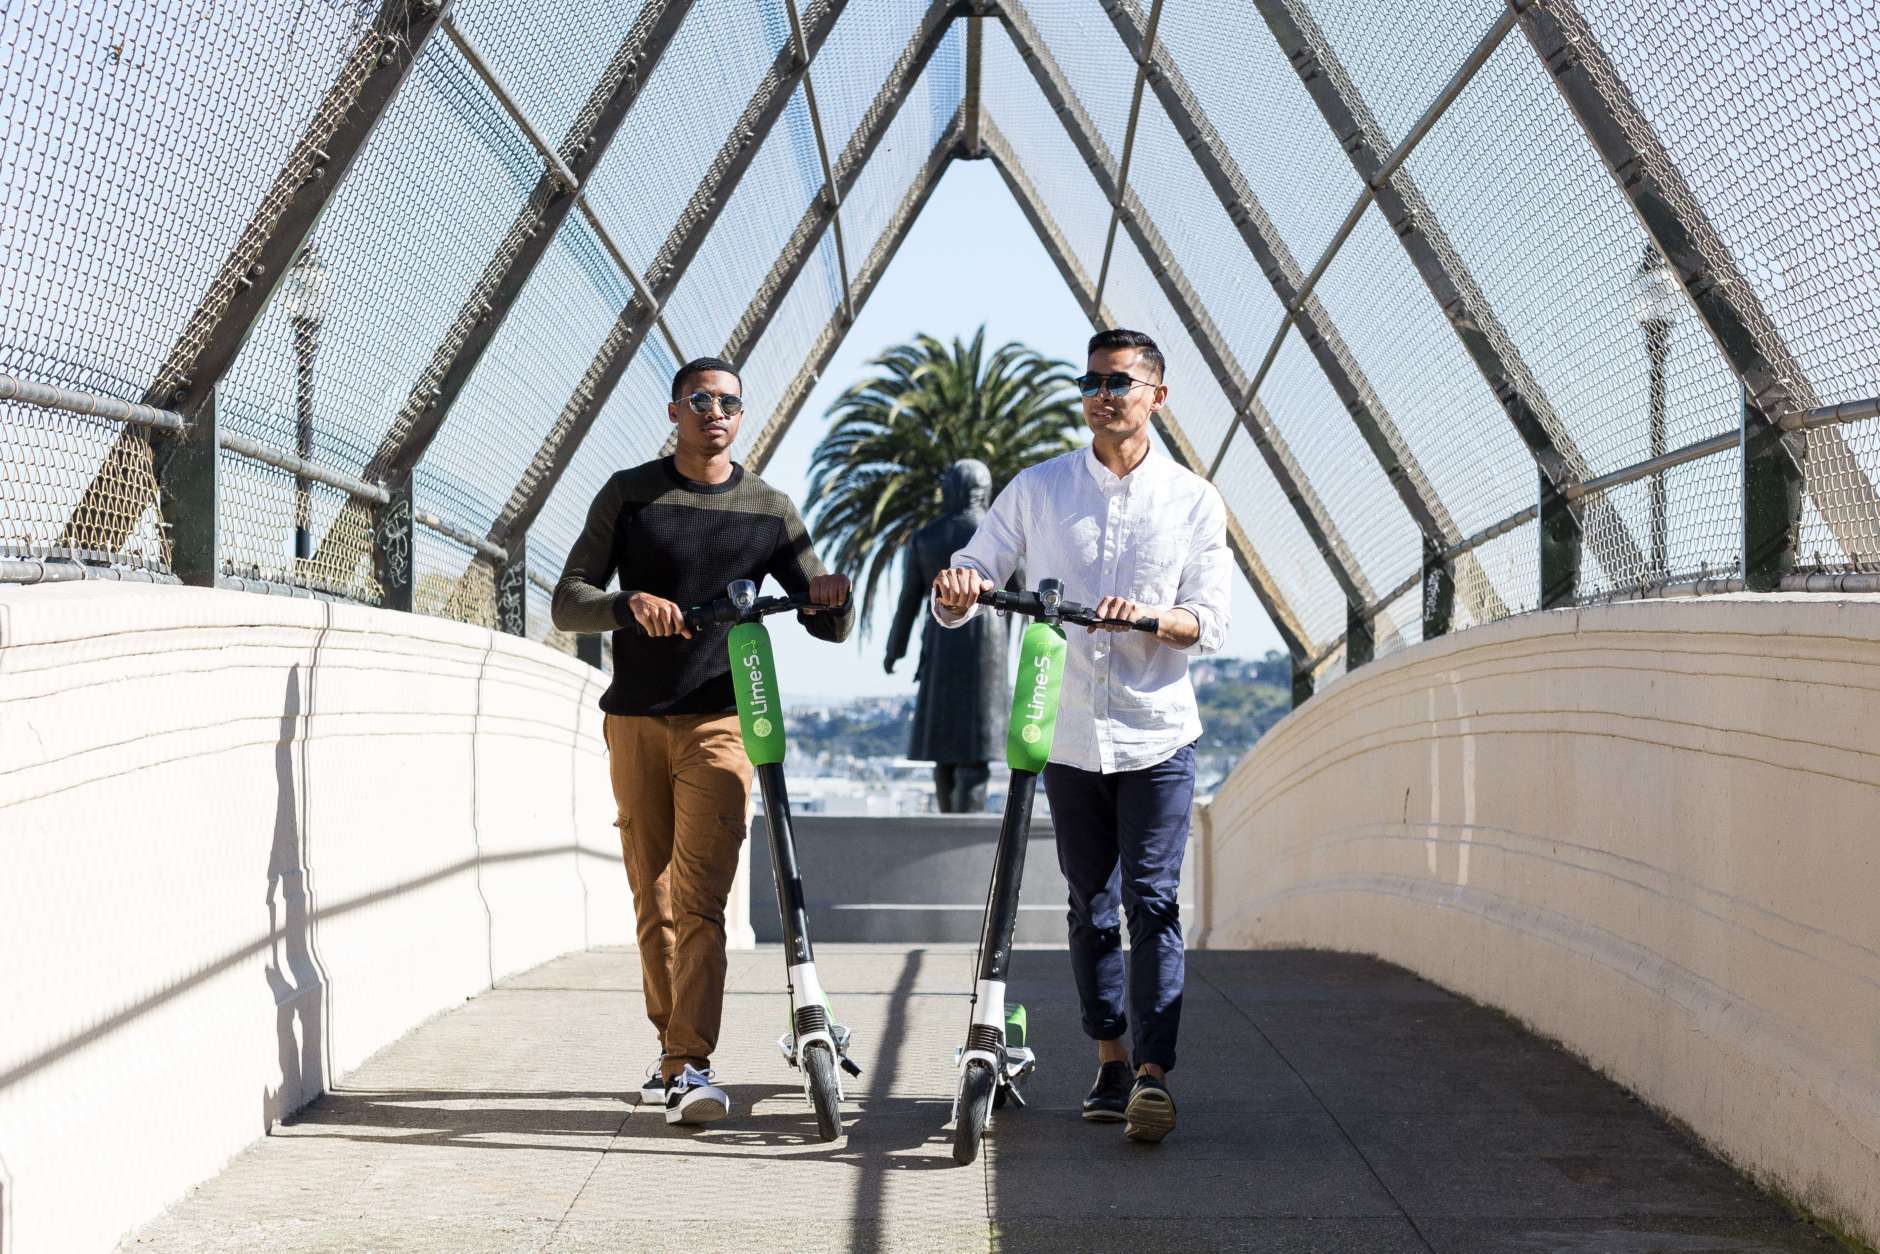 It follows LimeBike's launch of electric scooters in San Diego in February. (Photo credit: LimeBike)